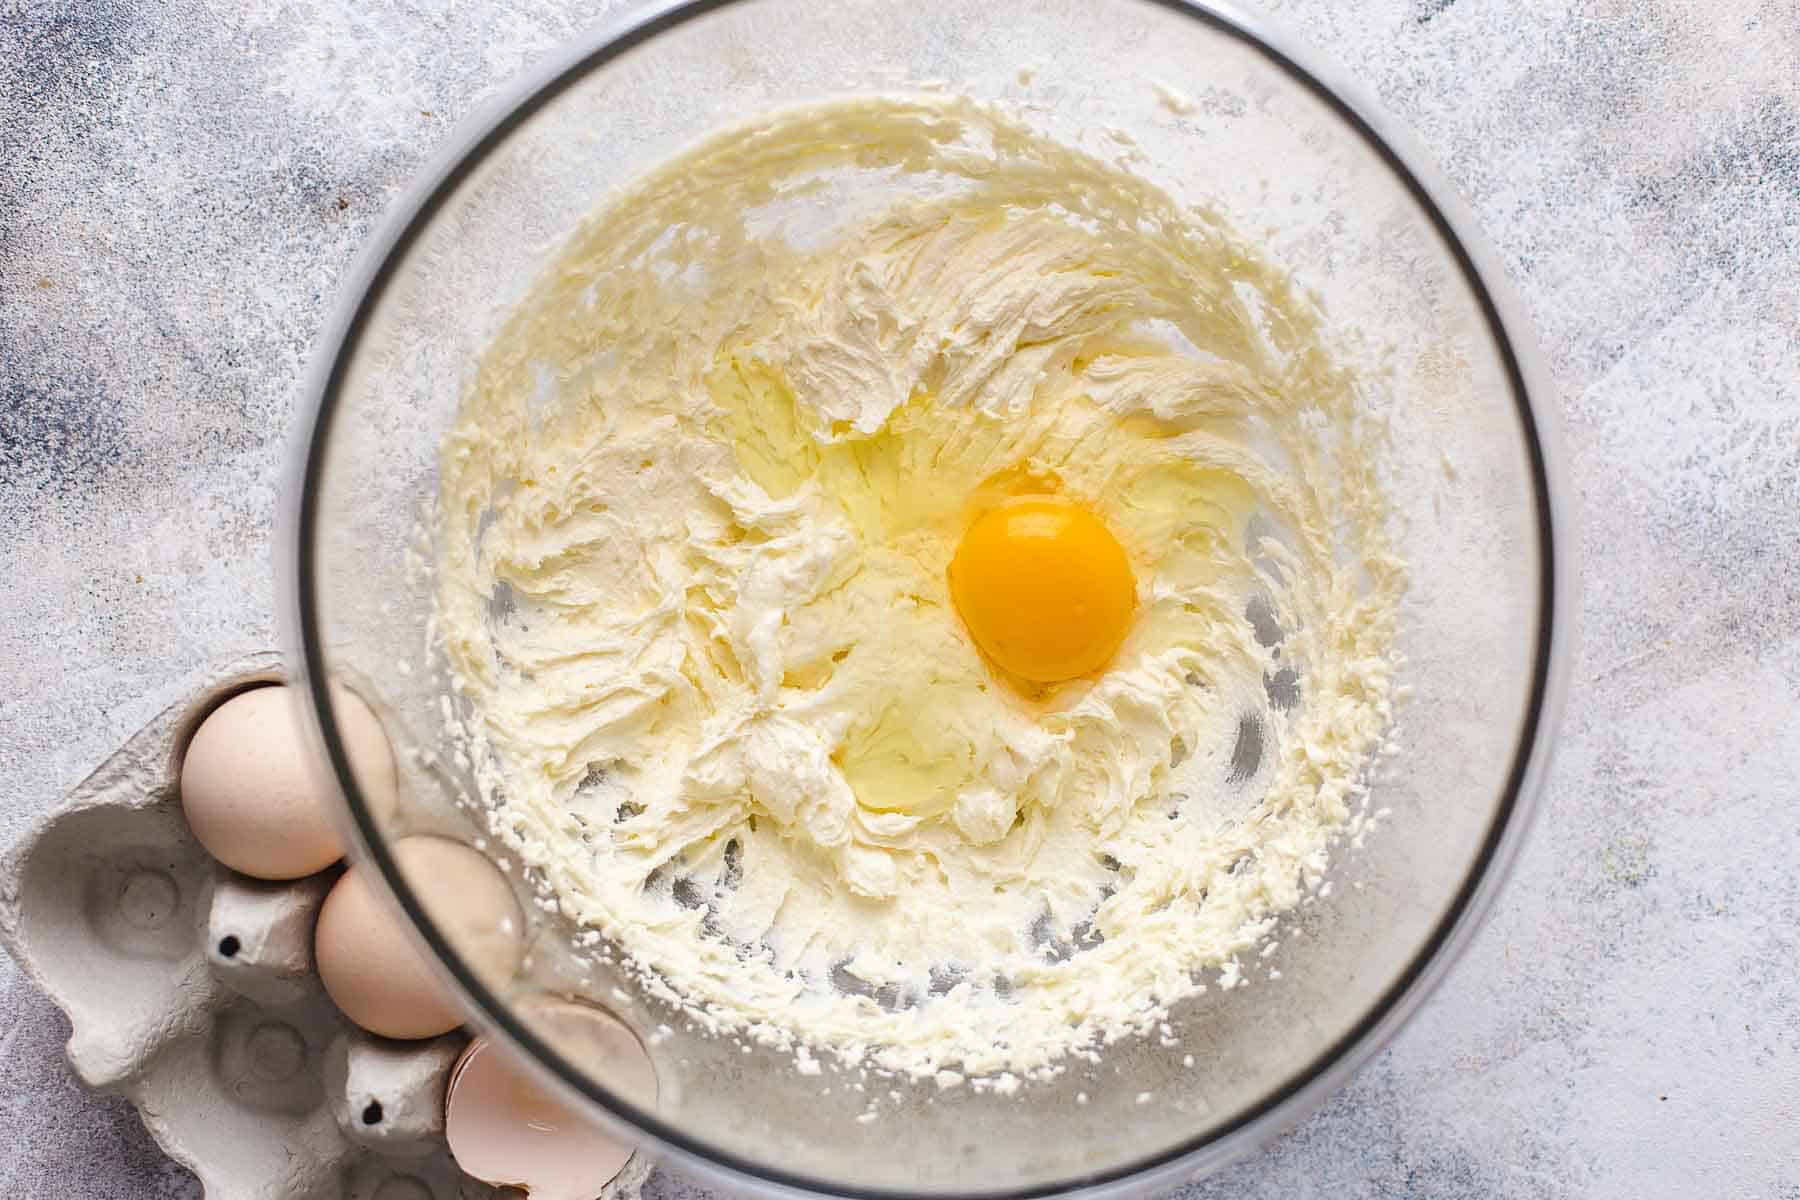 Mixing progress: adding first egg to the batter